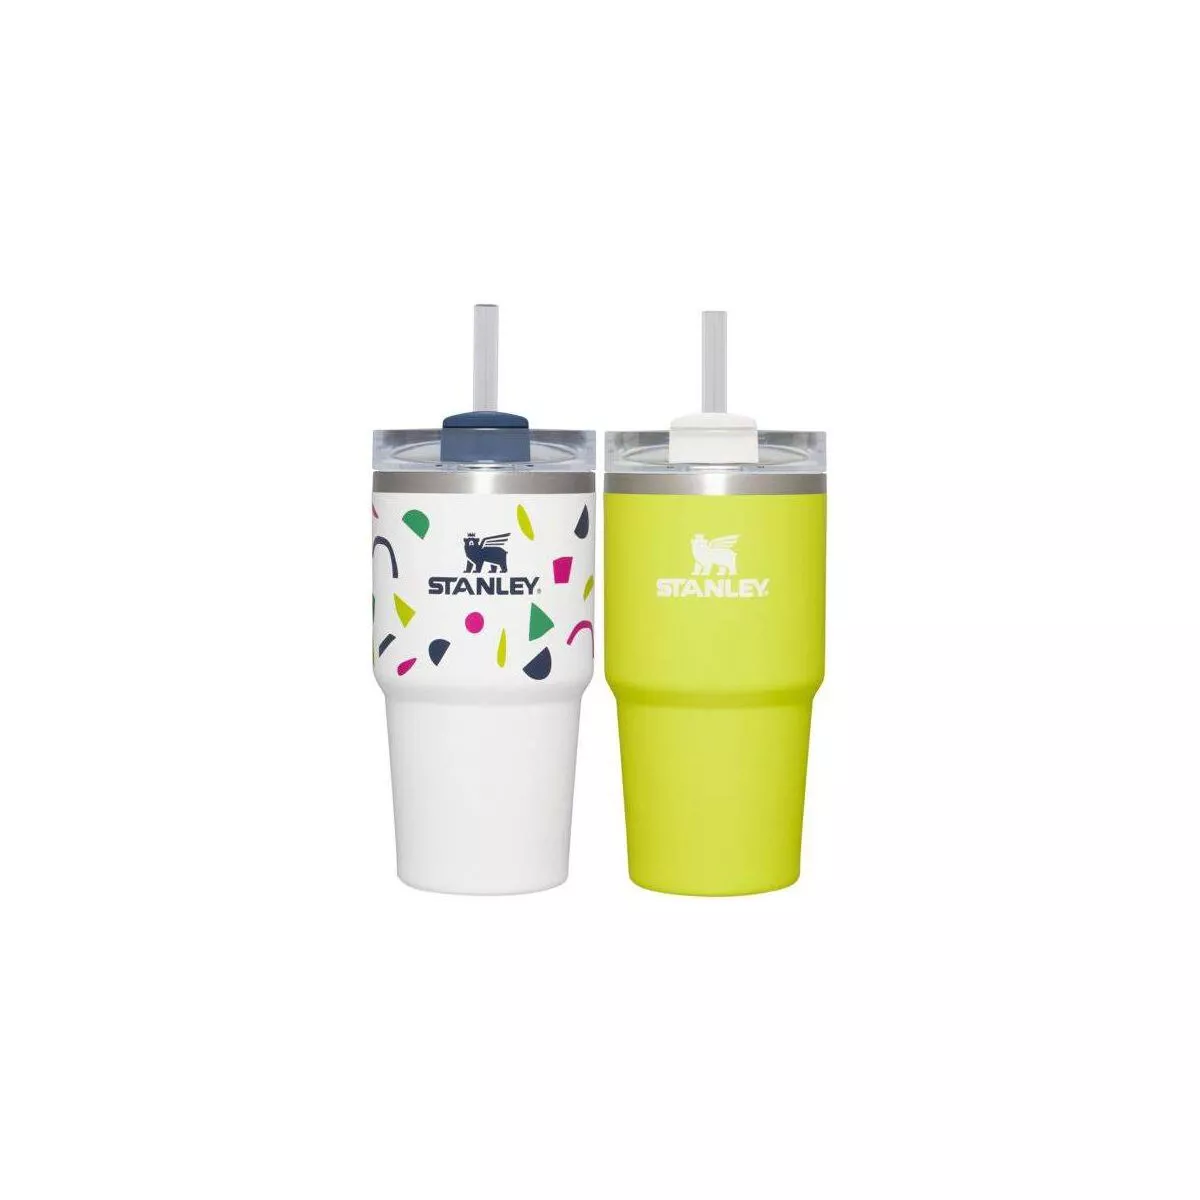 These sold-out Target travel mugs are selling for $200 on